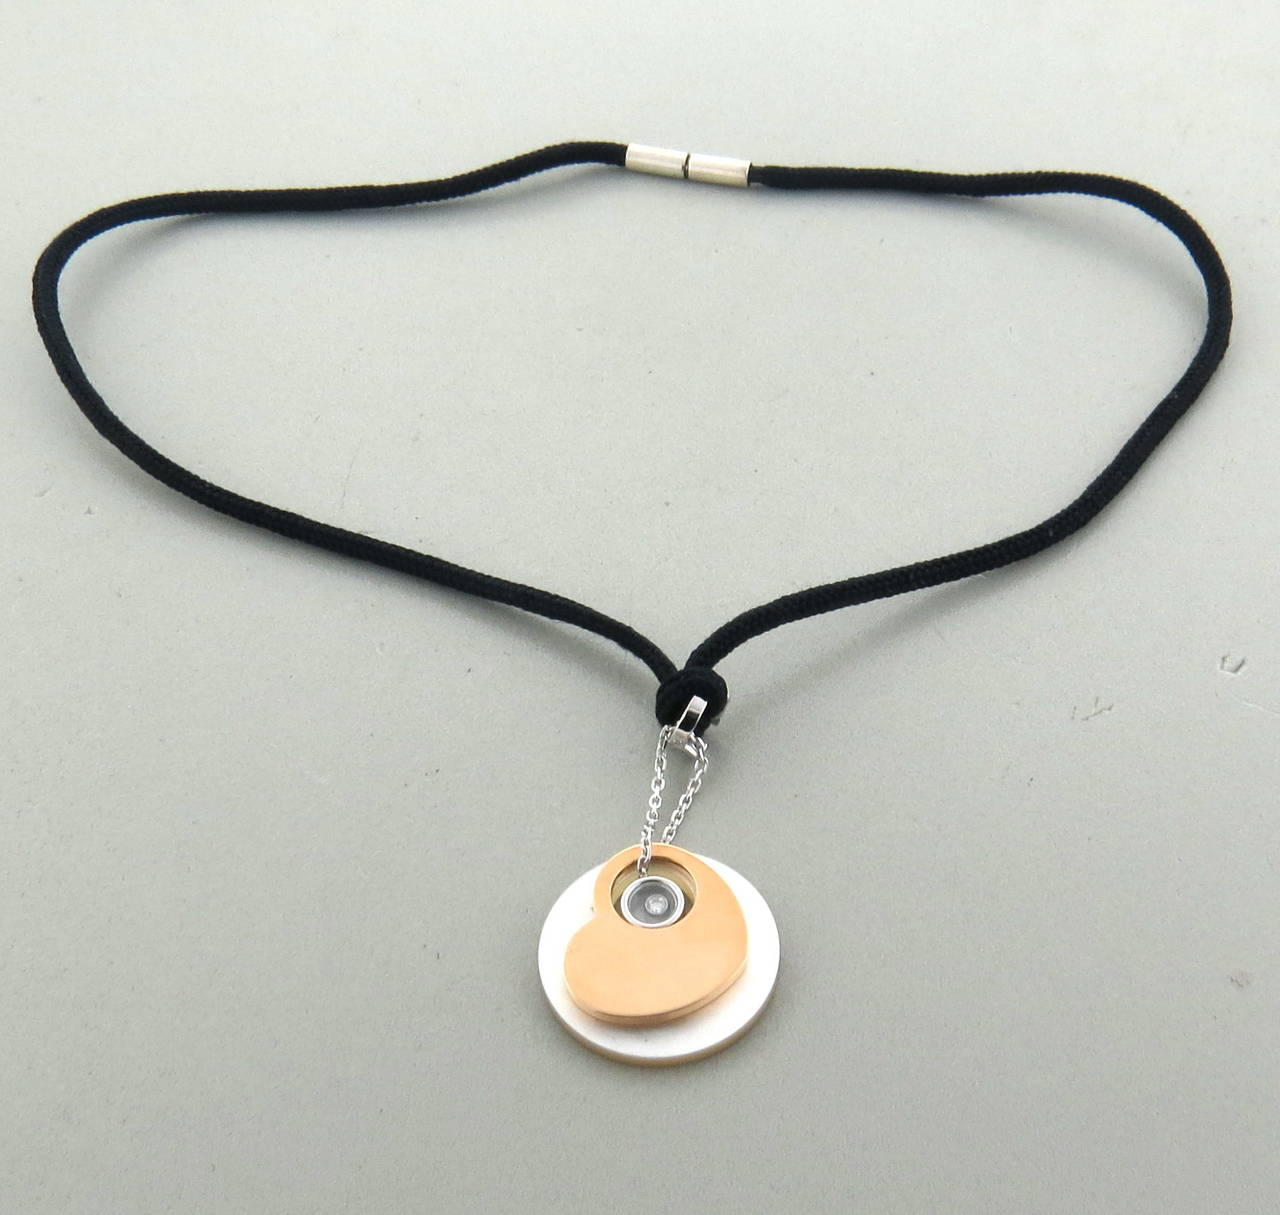 An 18k white and rose gold pendant / necklace which comes with a silk cord.  The pendant is made up of a mother of pearl disk, a rose gold heart and a floating diamond 0.05cts G/VS set in white gold.  Crafted by Chopard, the necklace measures  16